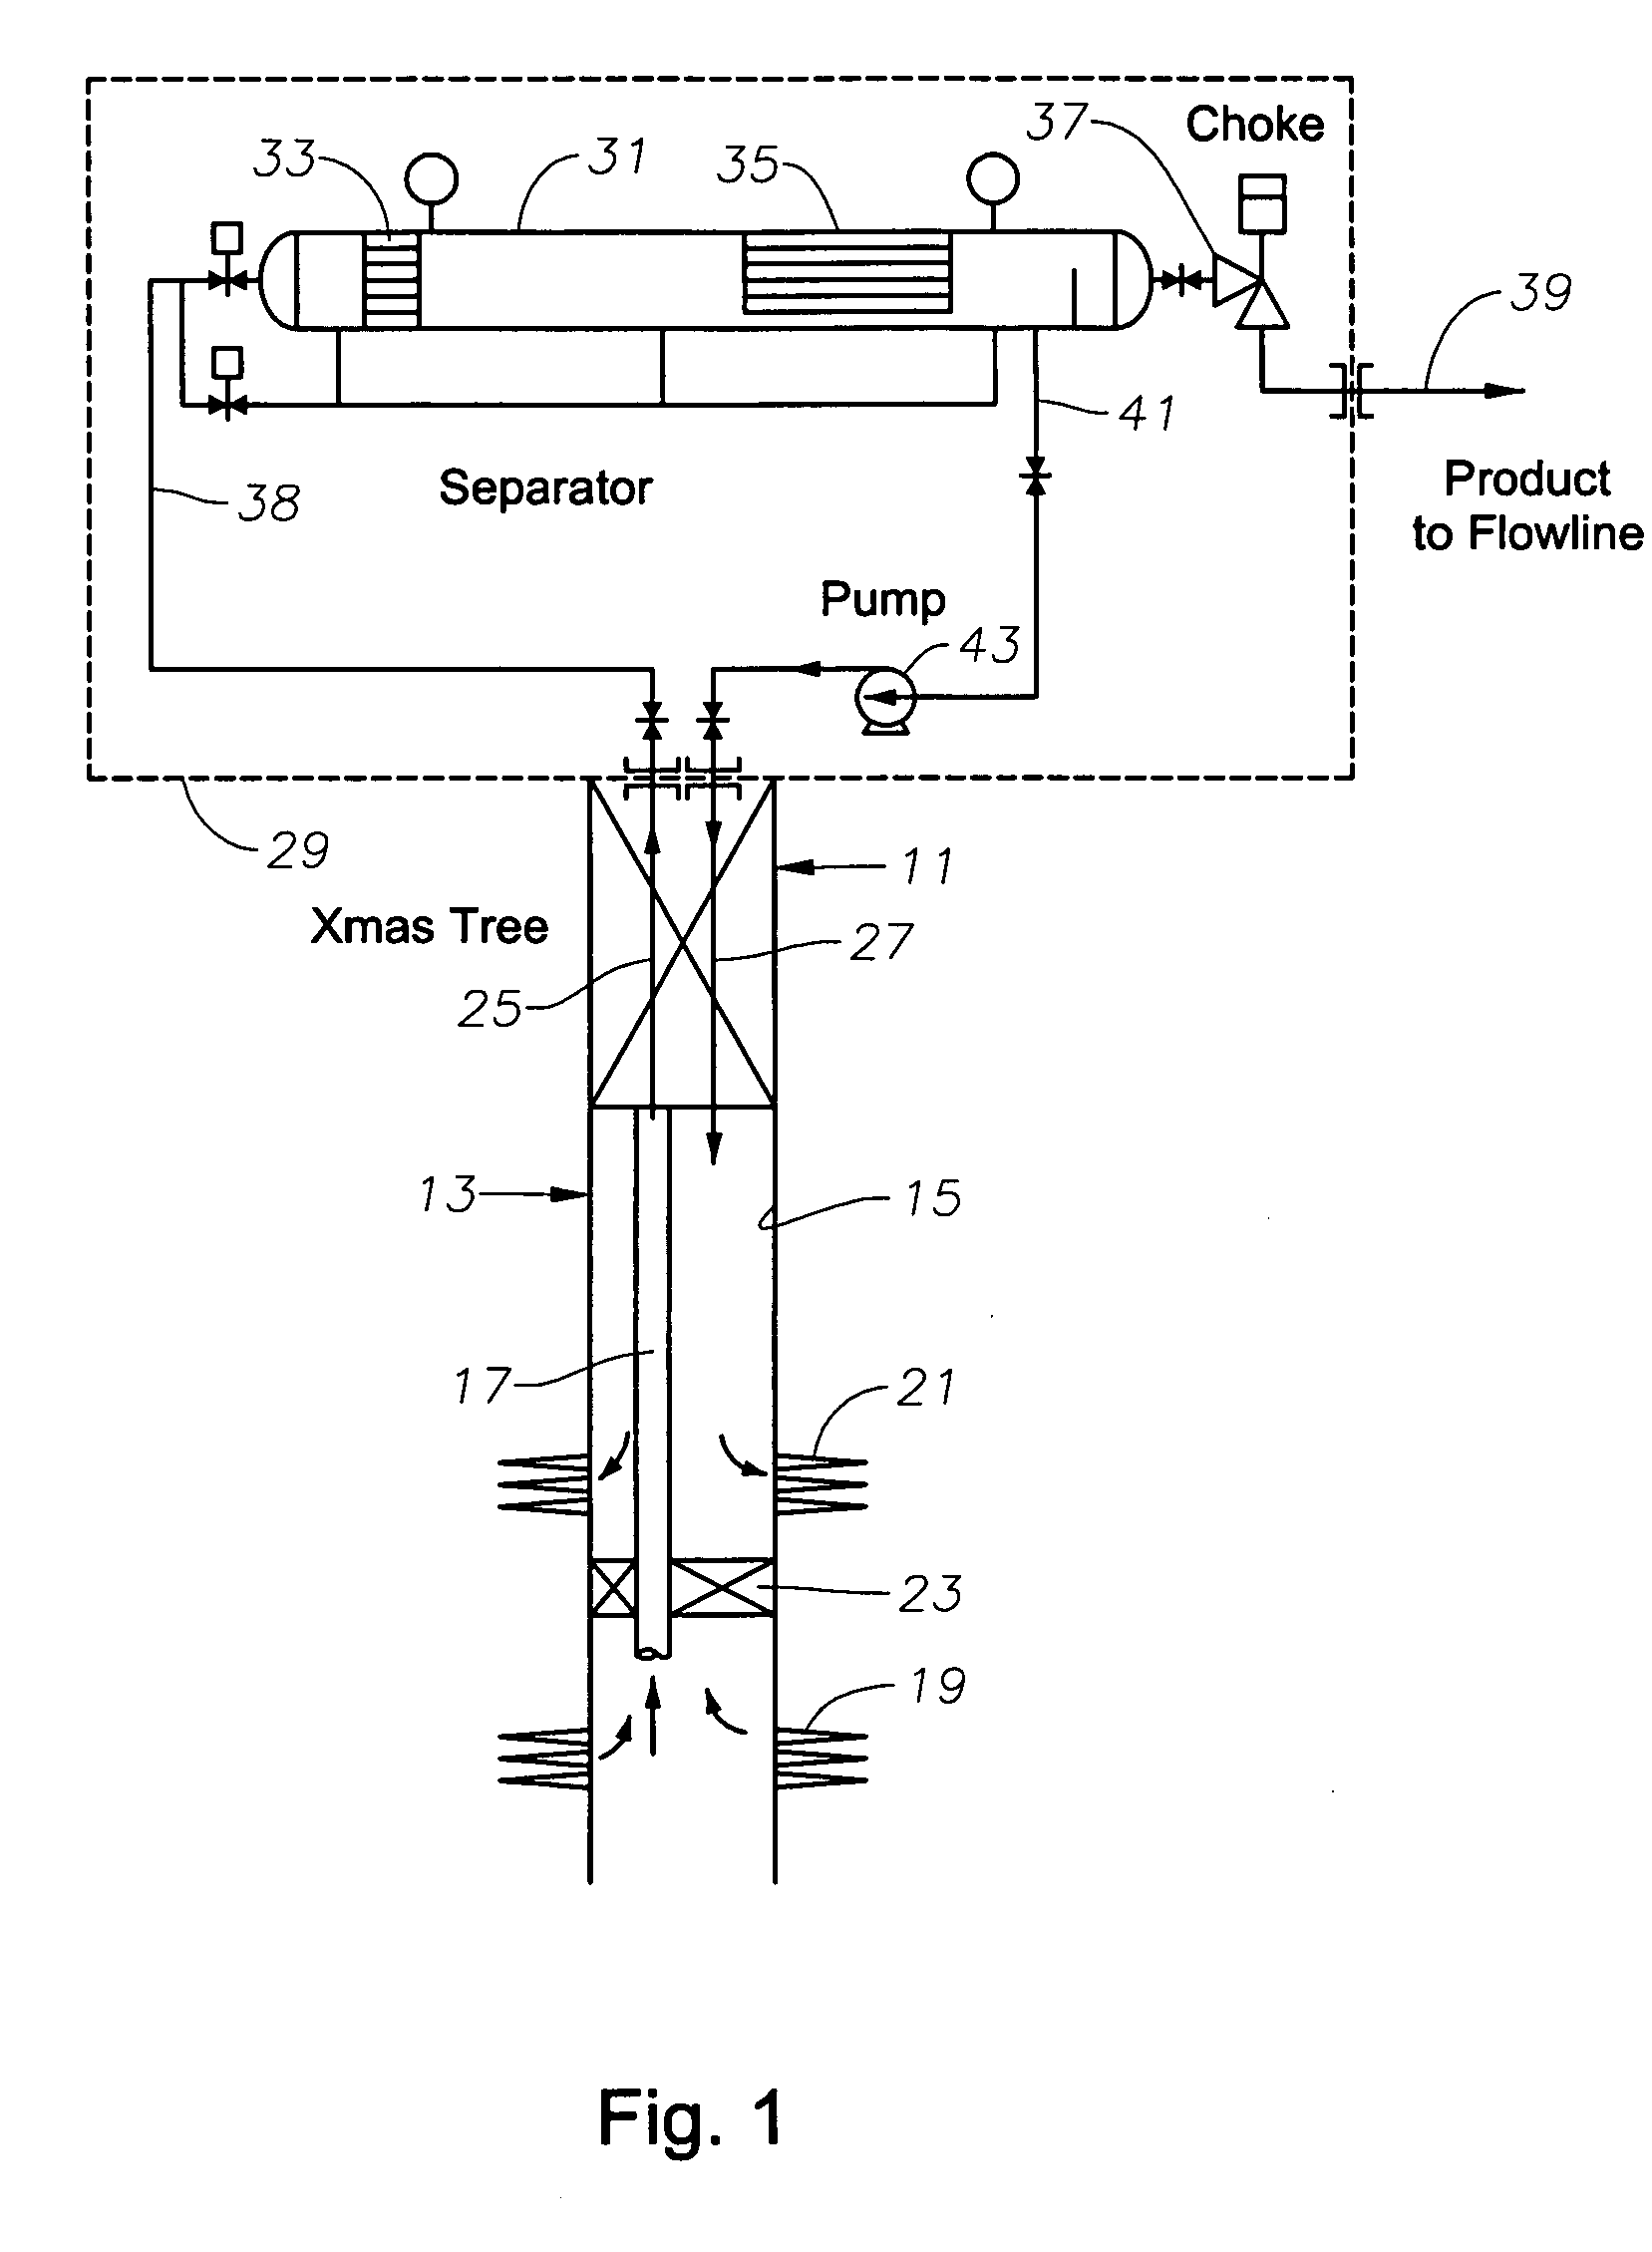 Subsea well separation and reinjection system